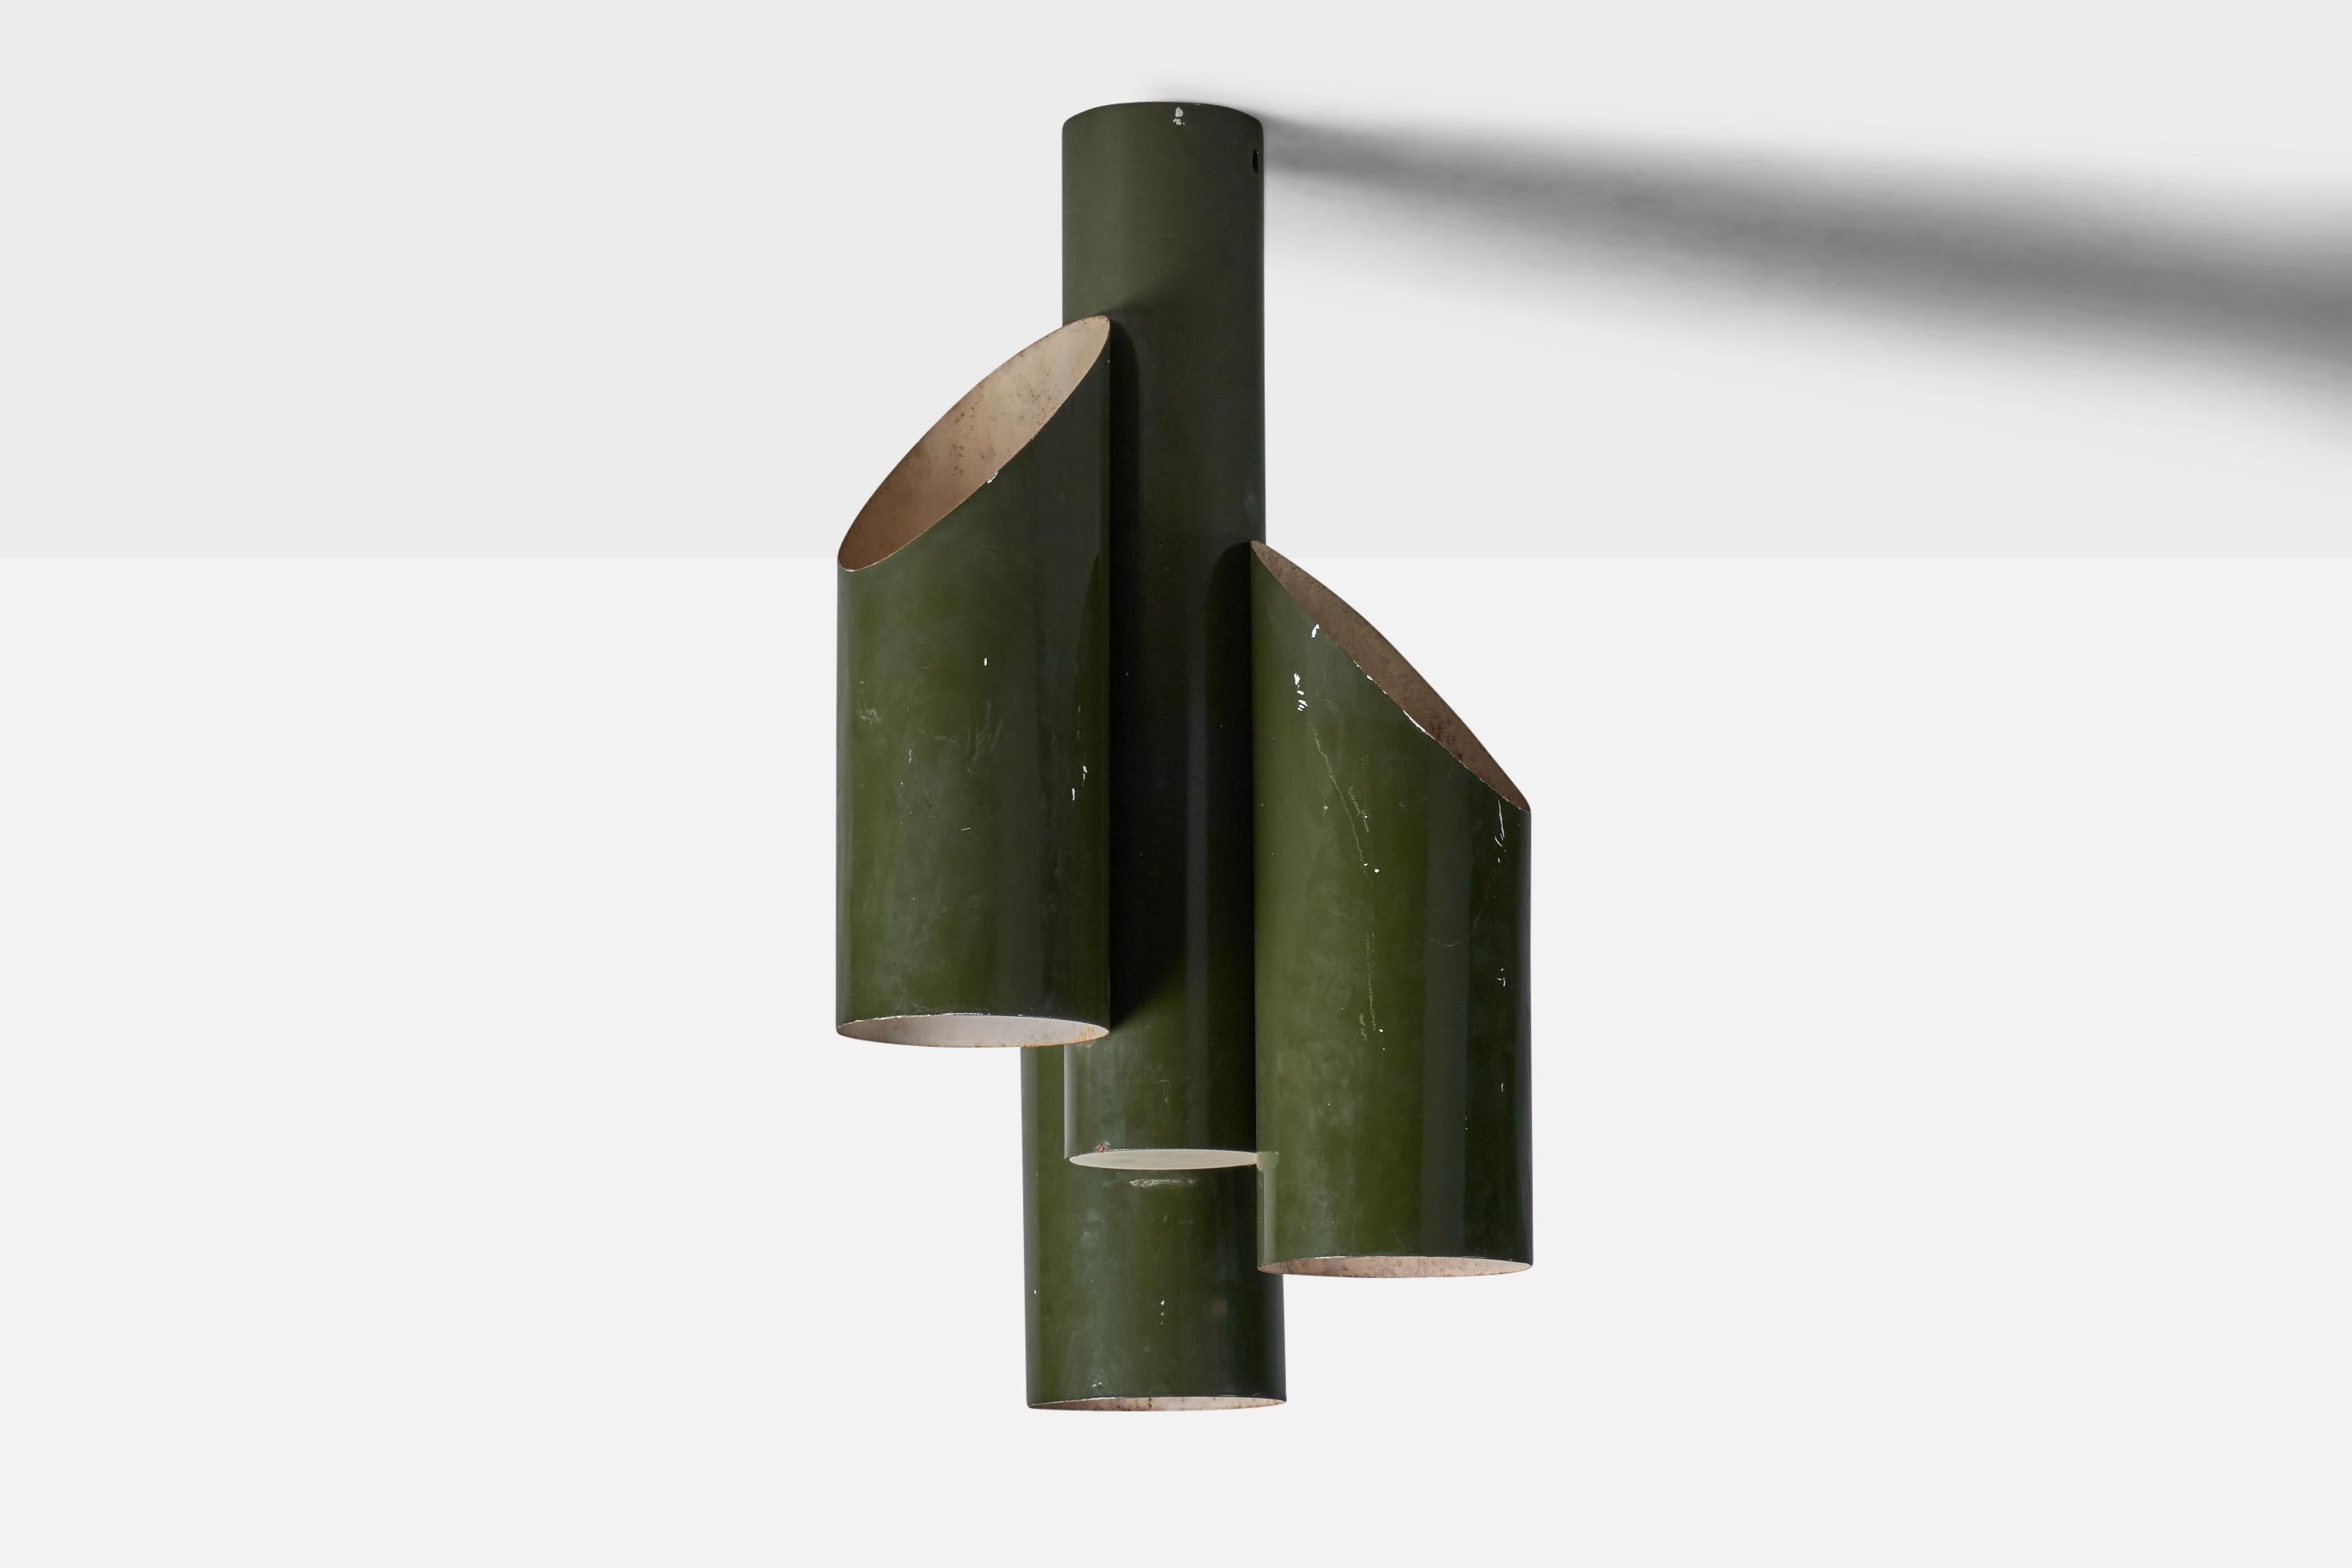 A green-lacquered metal chandelier designed and produced in Italy, 1940s.

Overall Dimensions (inches): 31